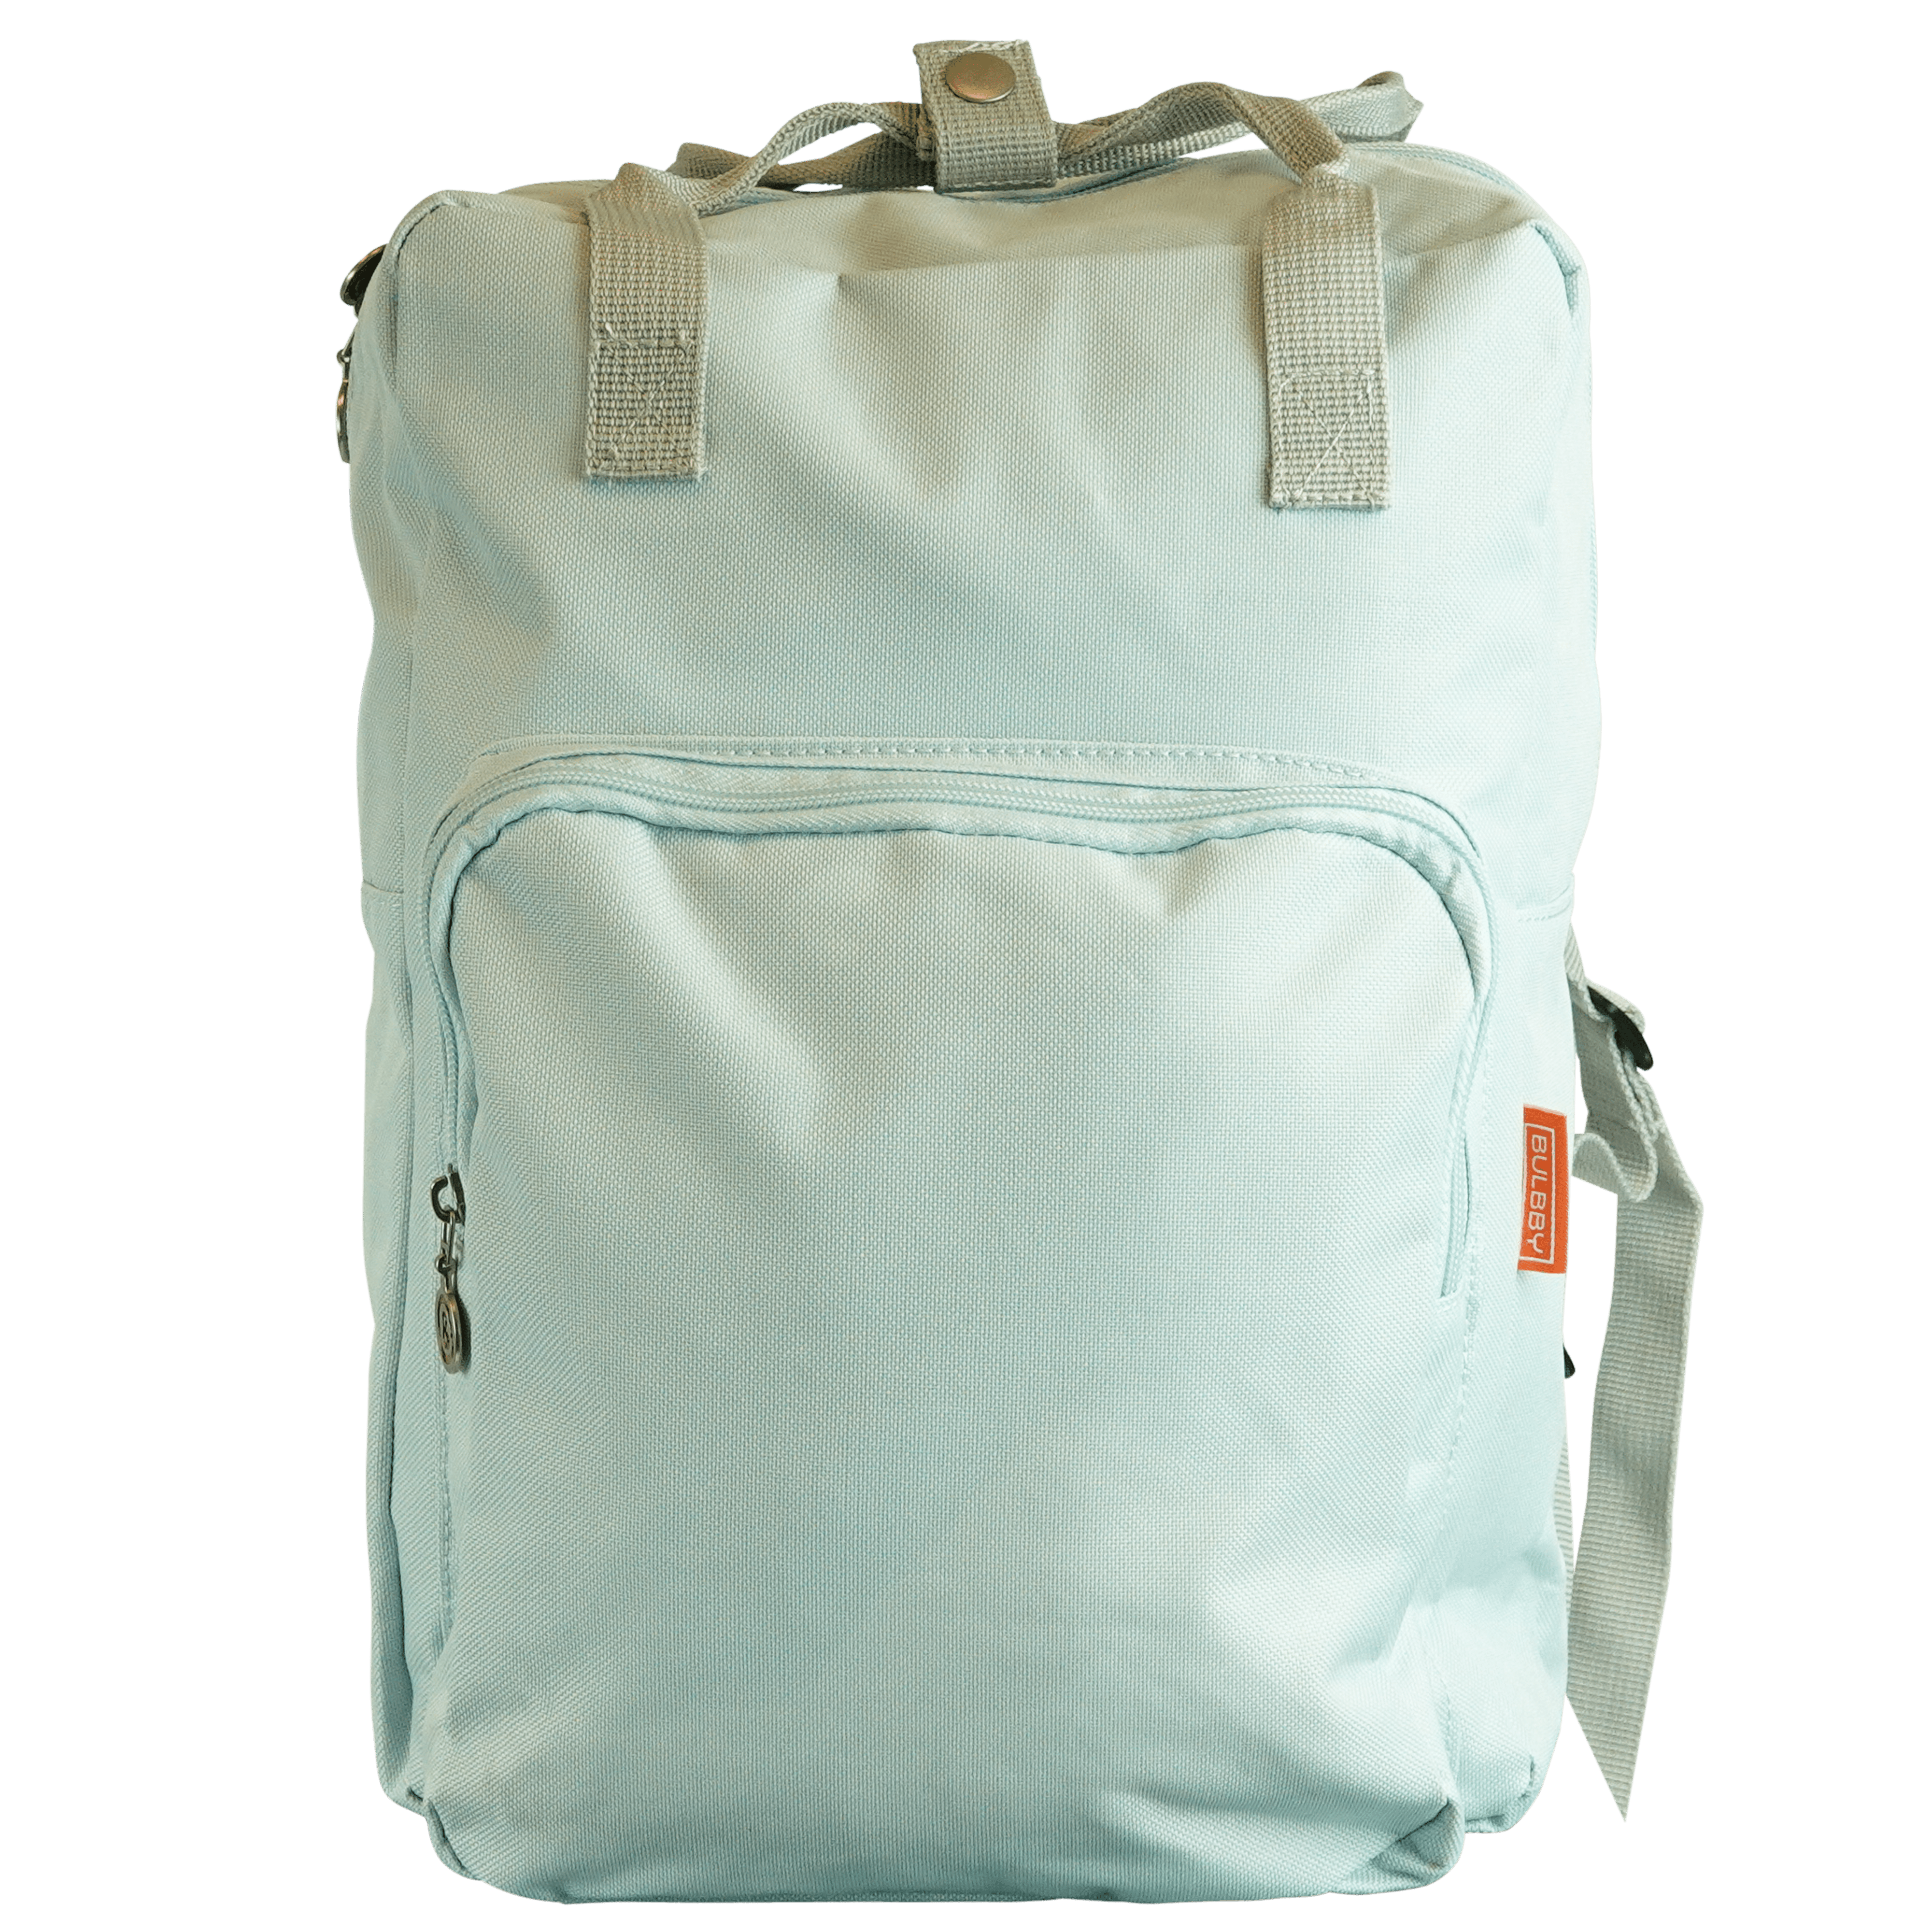 Backpack classic large mint